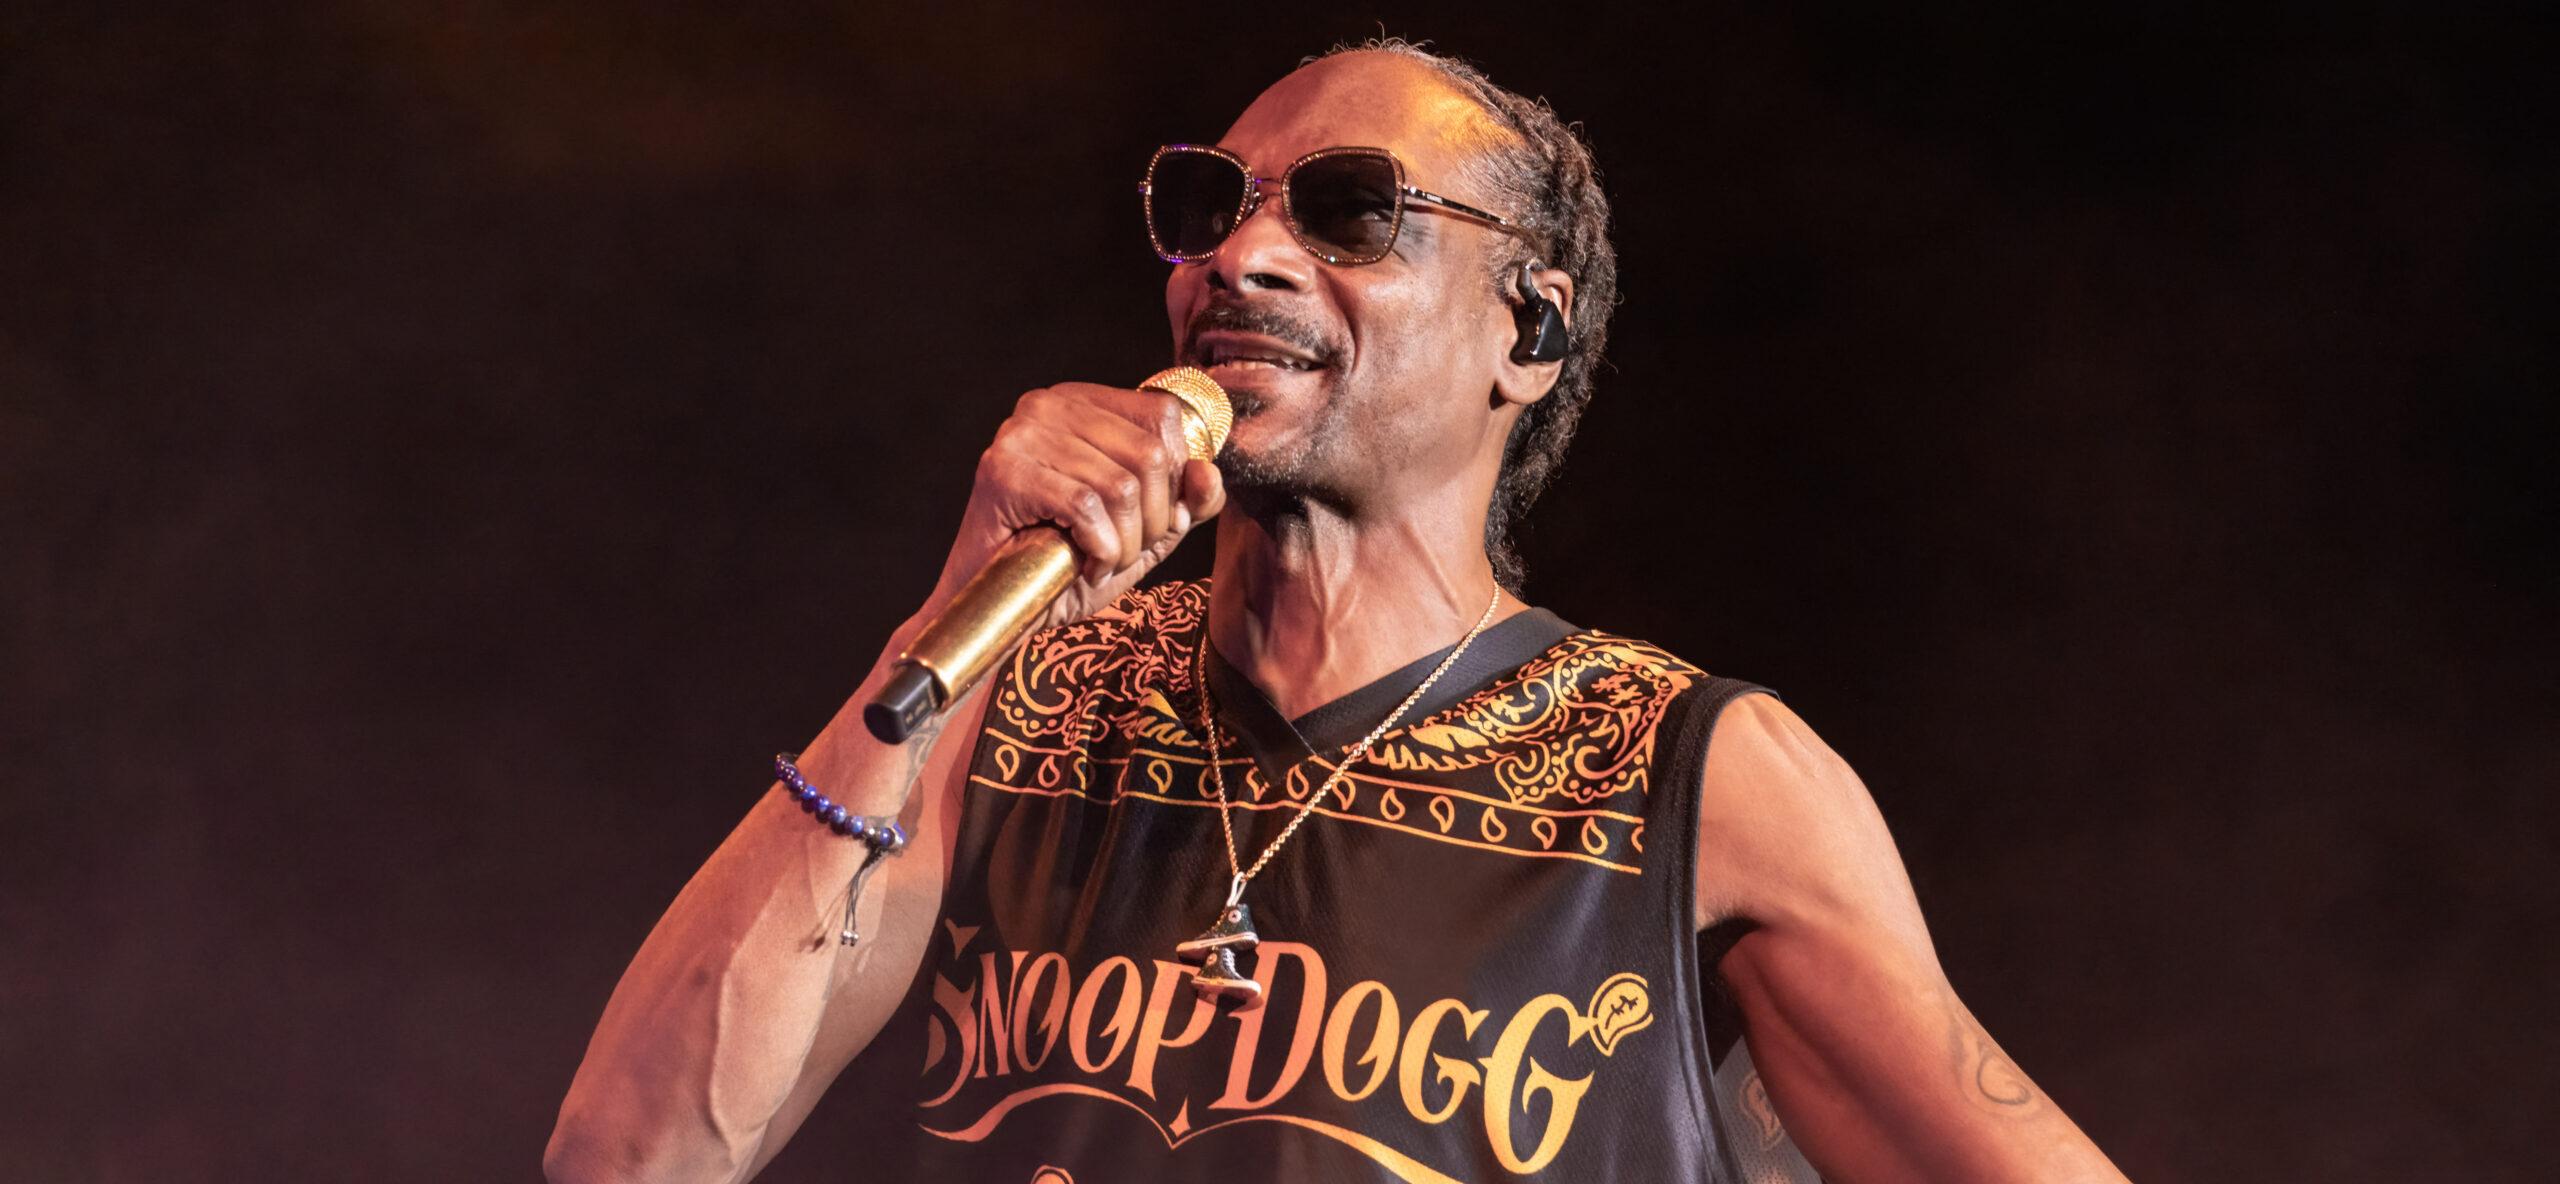 Snoop Dogg Pictured With Blunt In Hand Days After ‘Quitting Smoking’